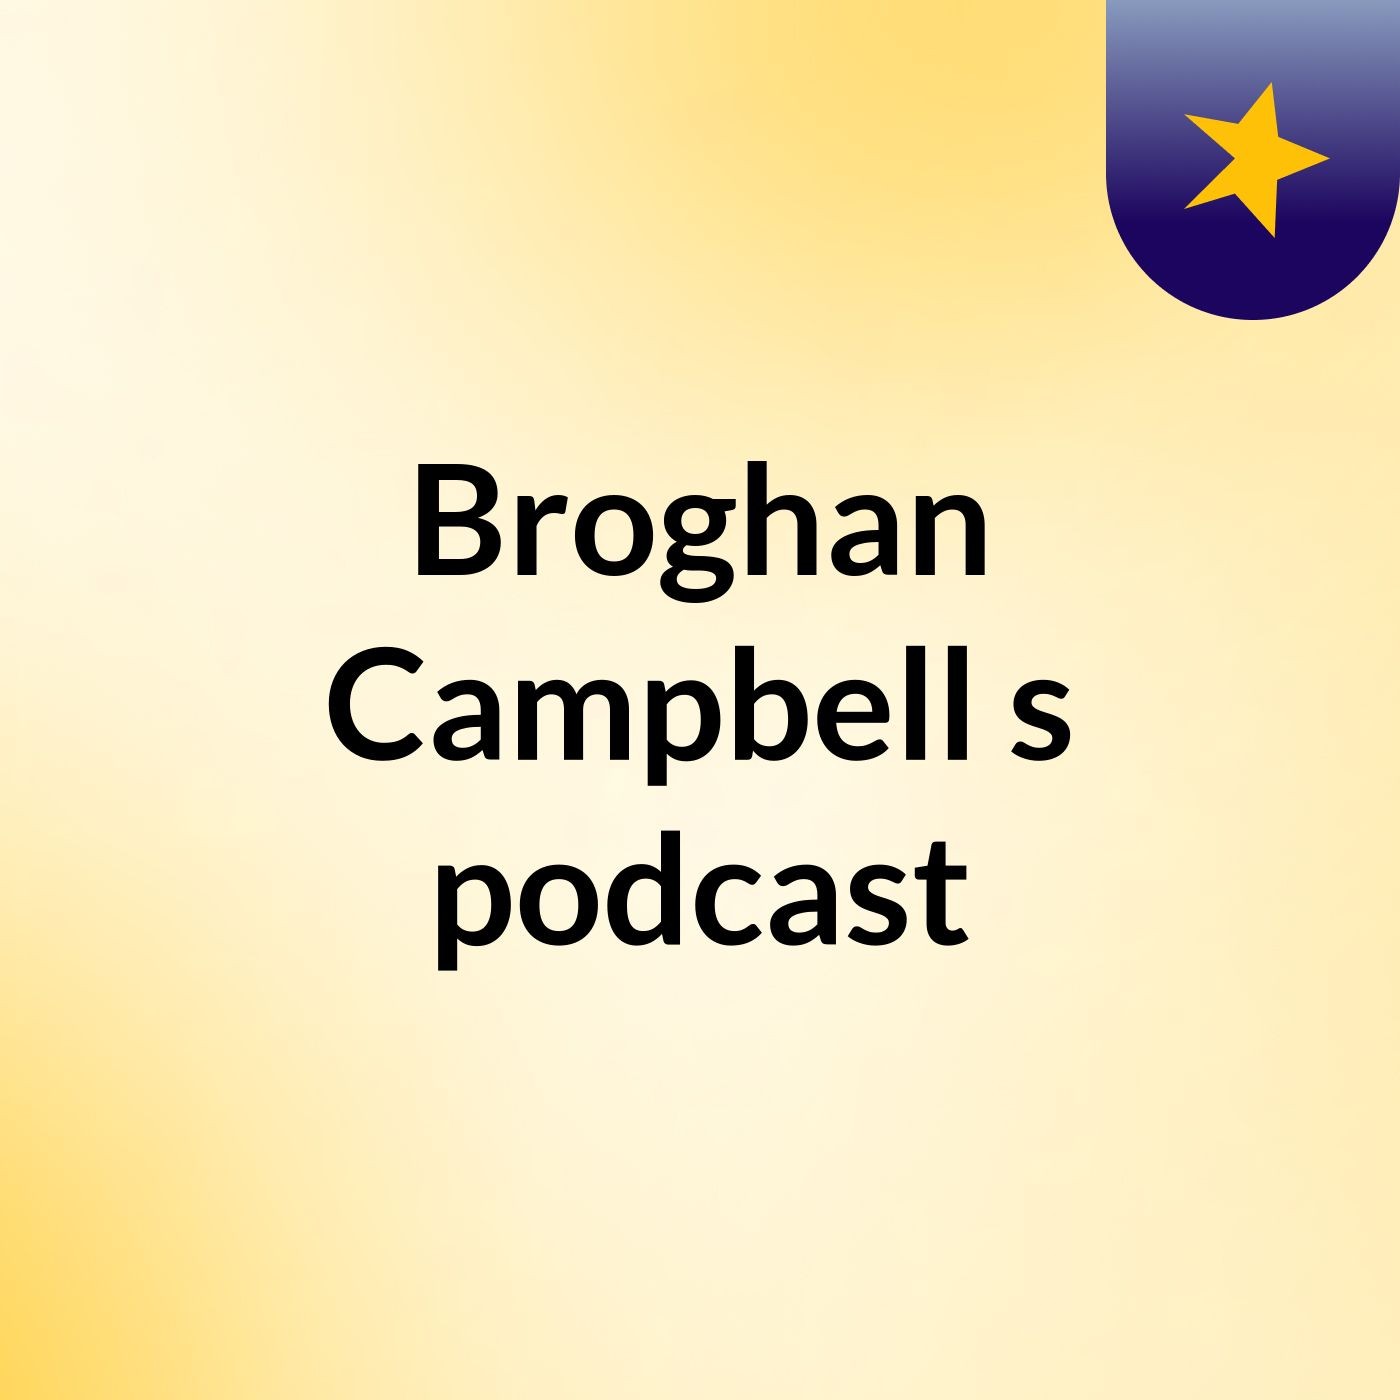 Episode 4 - Broghan Campbell's podcast